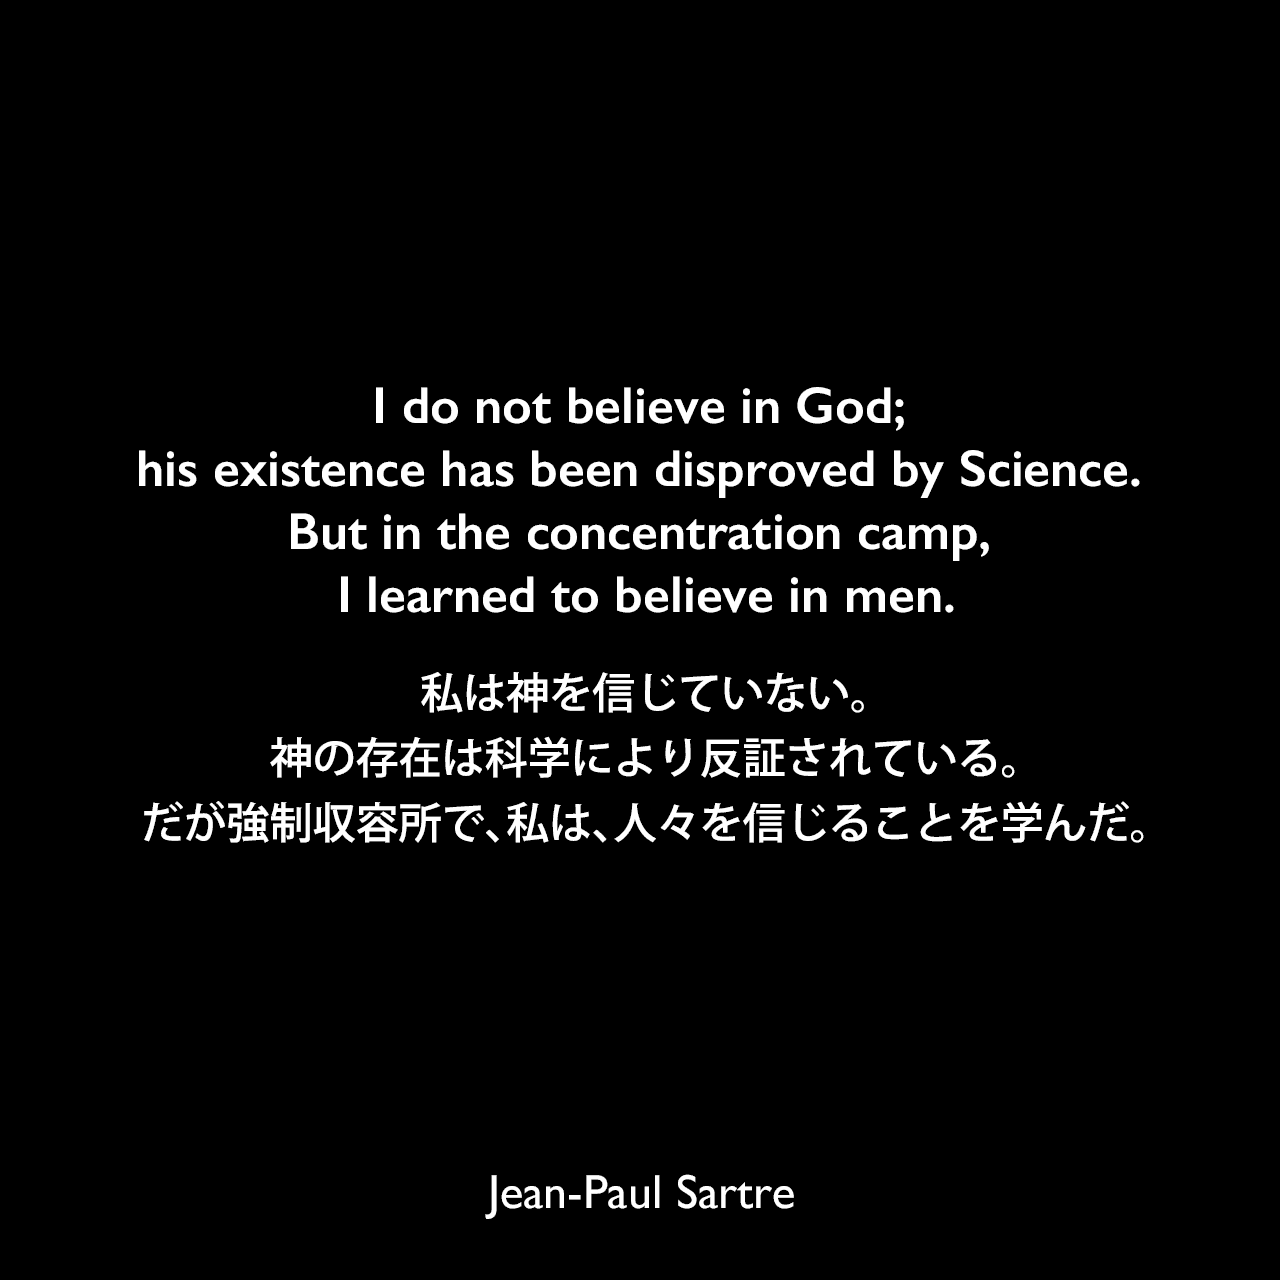 I do not believe in God; his existence has been disproved by Science. But in the concentration camp, I learned to believe in men.私は神を信じていない。神の存在は科学により反証されている。だが強制収容所で、私は、人々を信じることを学んだ。- サルトルによる小説「嘔吐」よりJean-Paul Sartre